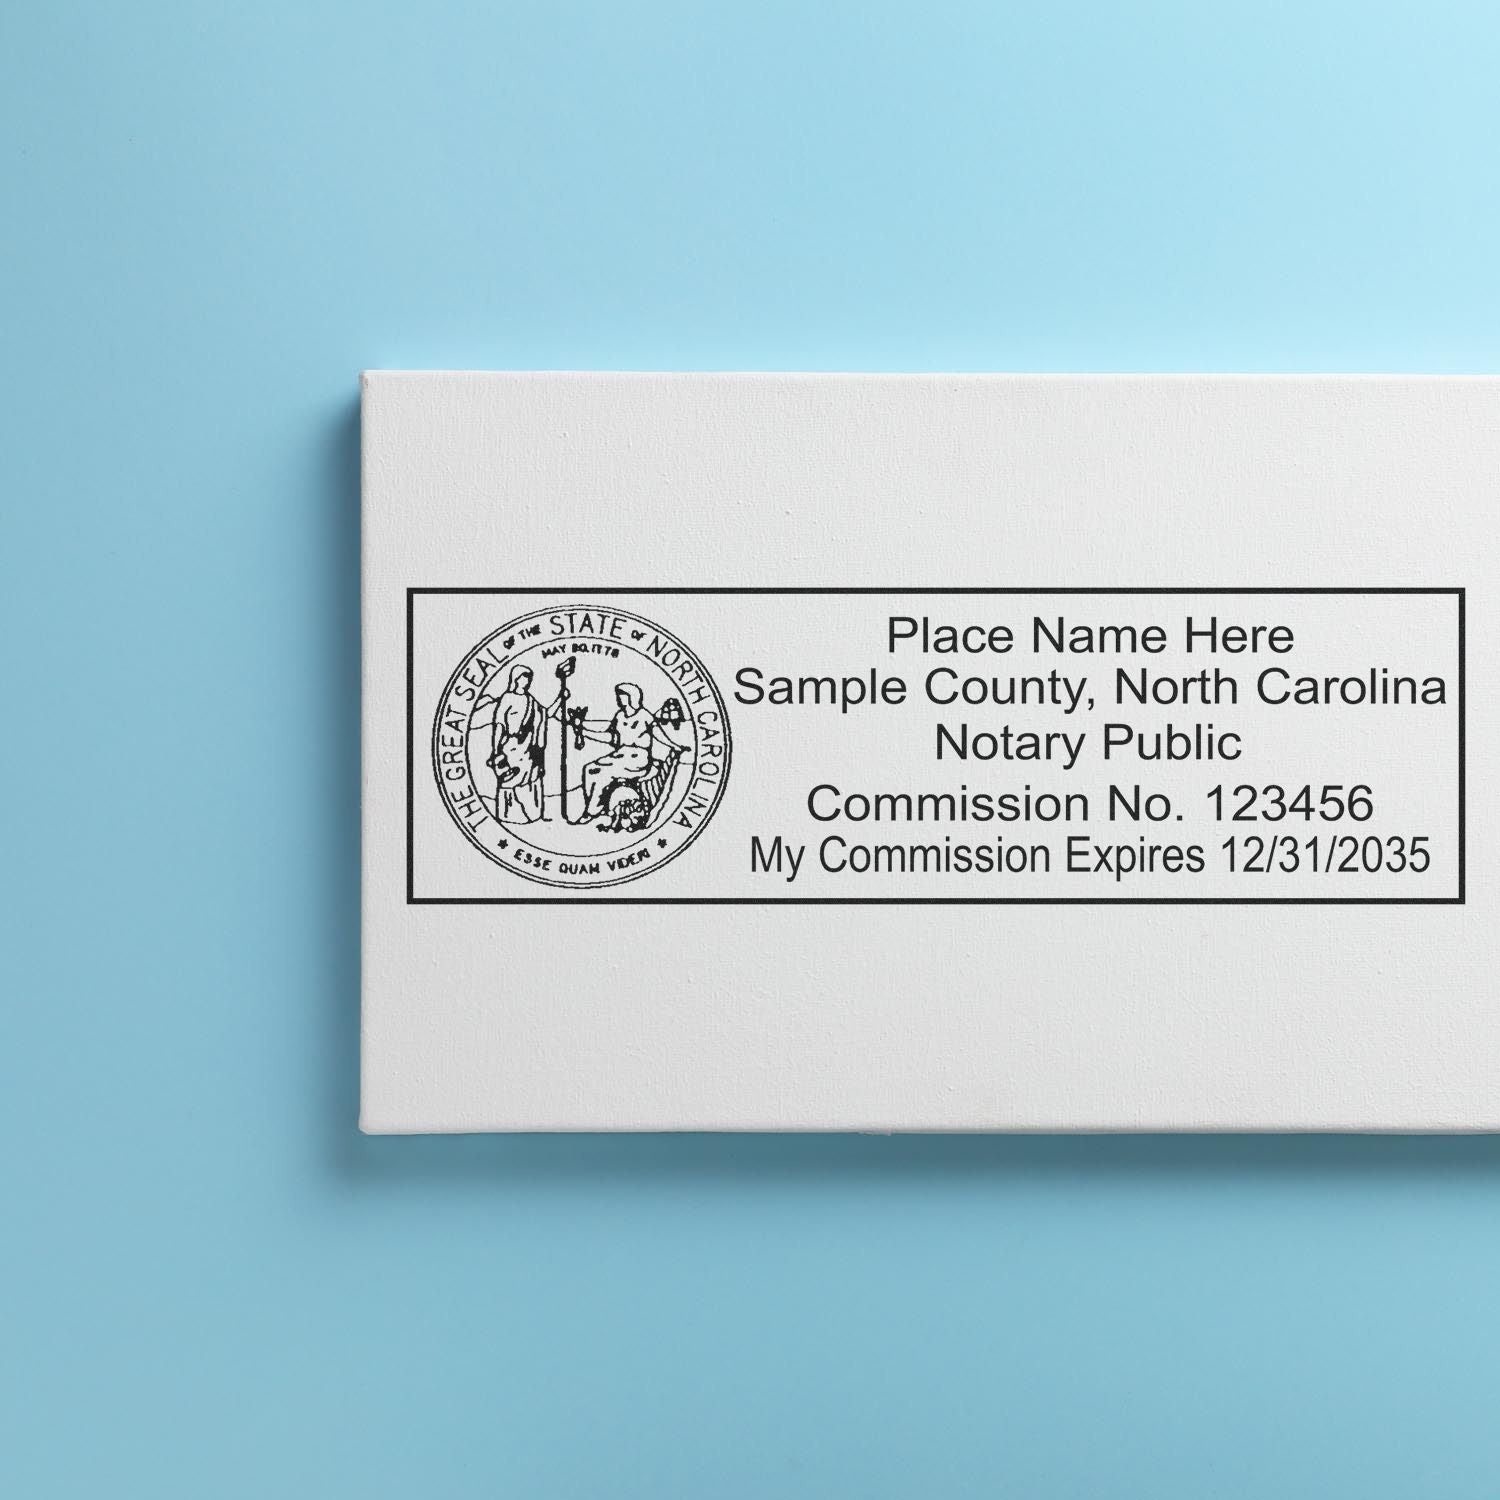 The main image for the MaxLight Premium Pre-Inked North Carolina State Seal Notarial Stamp depicting a sample of the imprint and electronic files